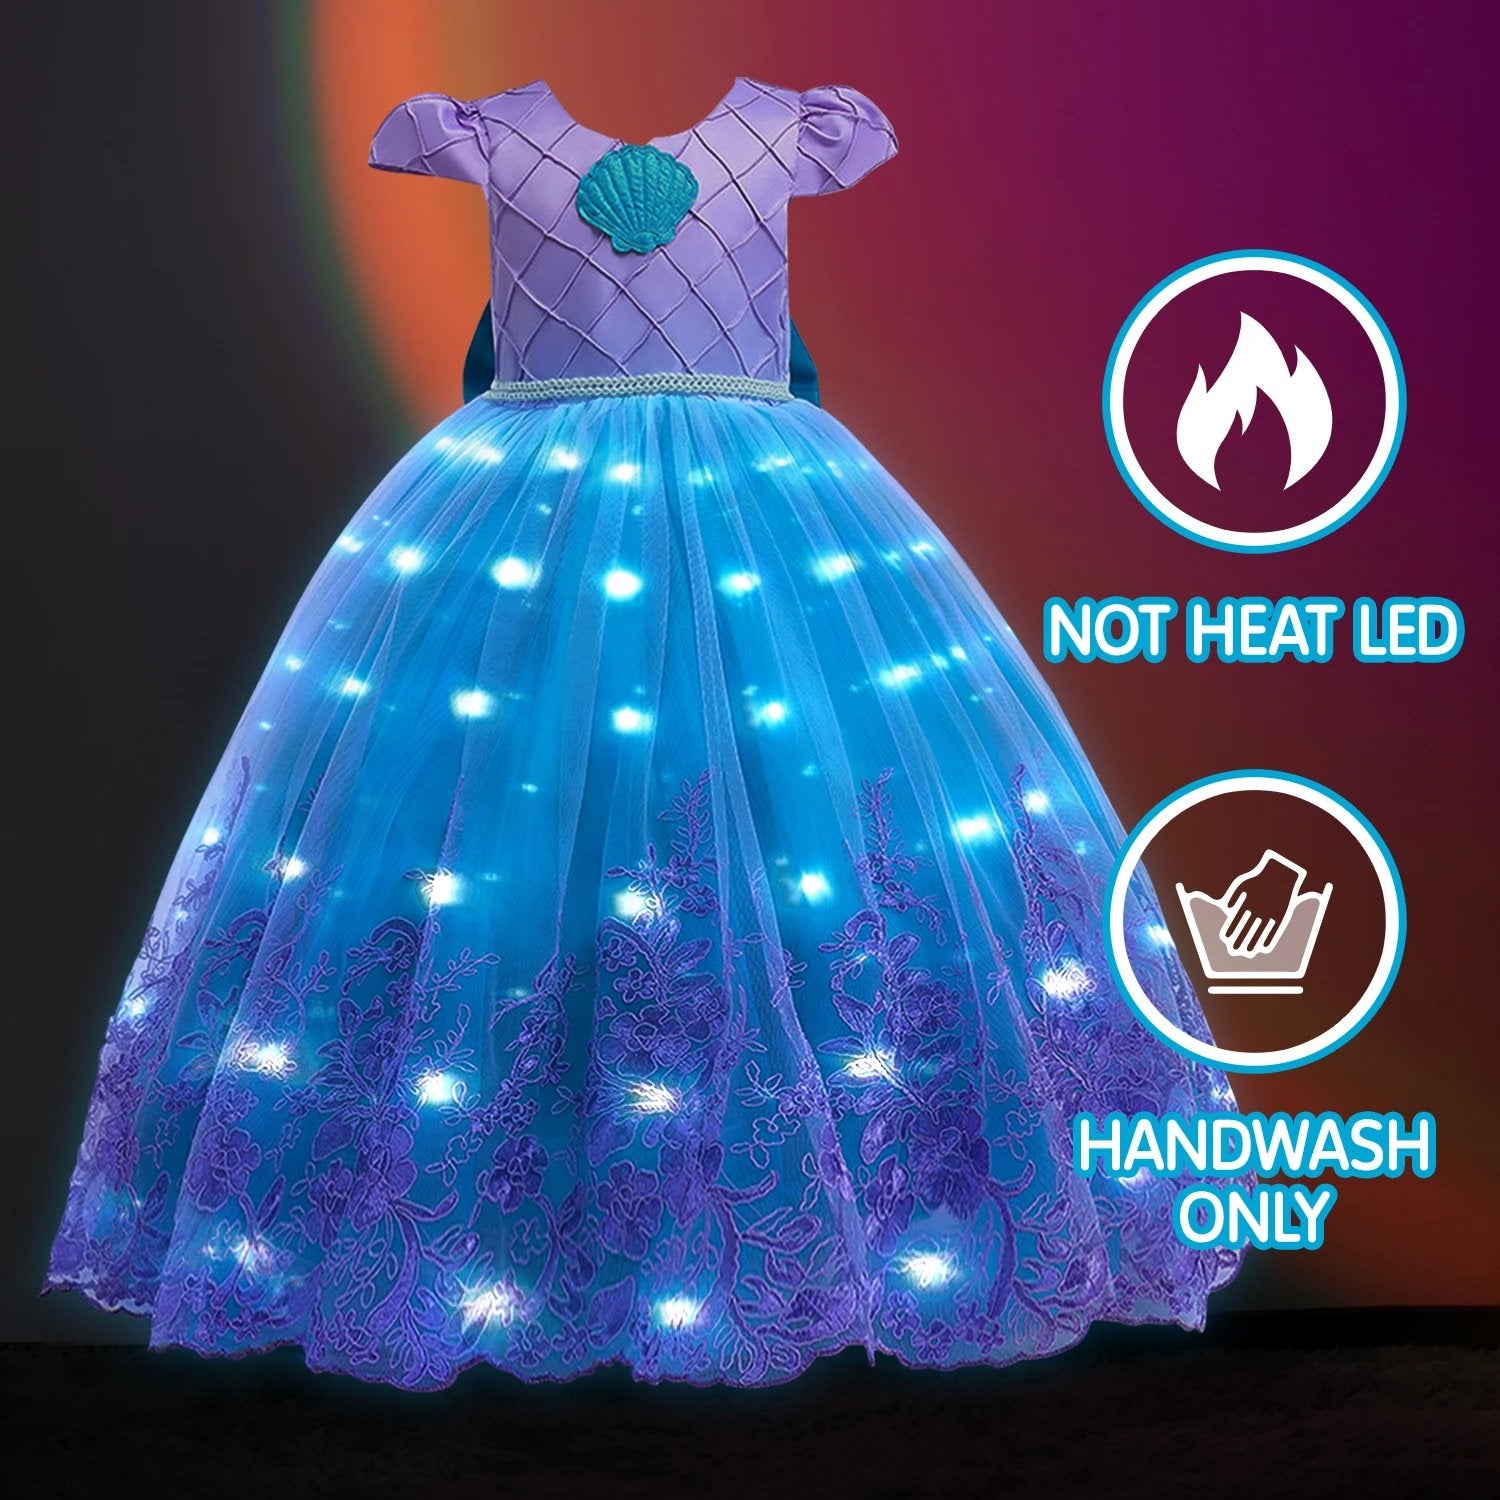 Girls Mermaid Light Up Dress Ariel Princess LED Party Outfit Tulle Seamaid Halloween Costume